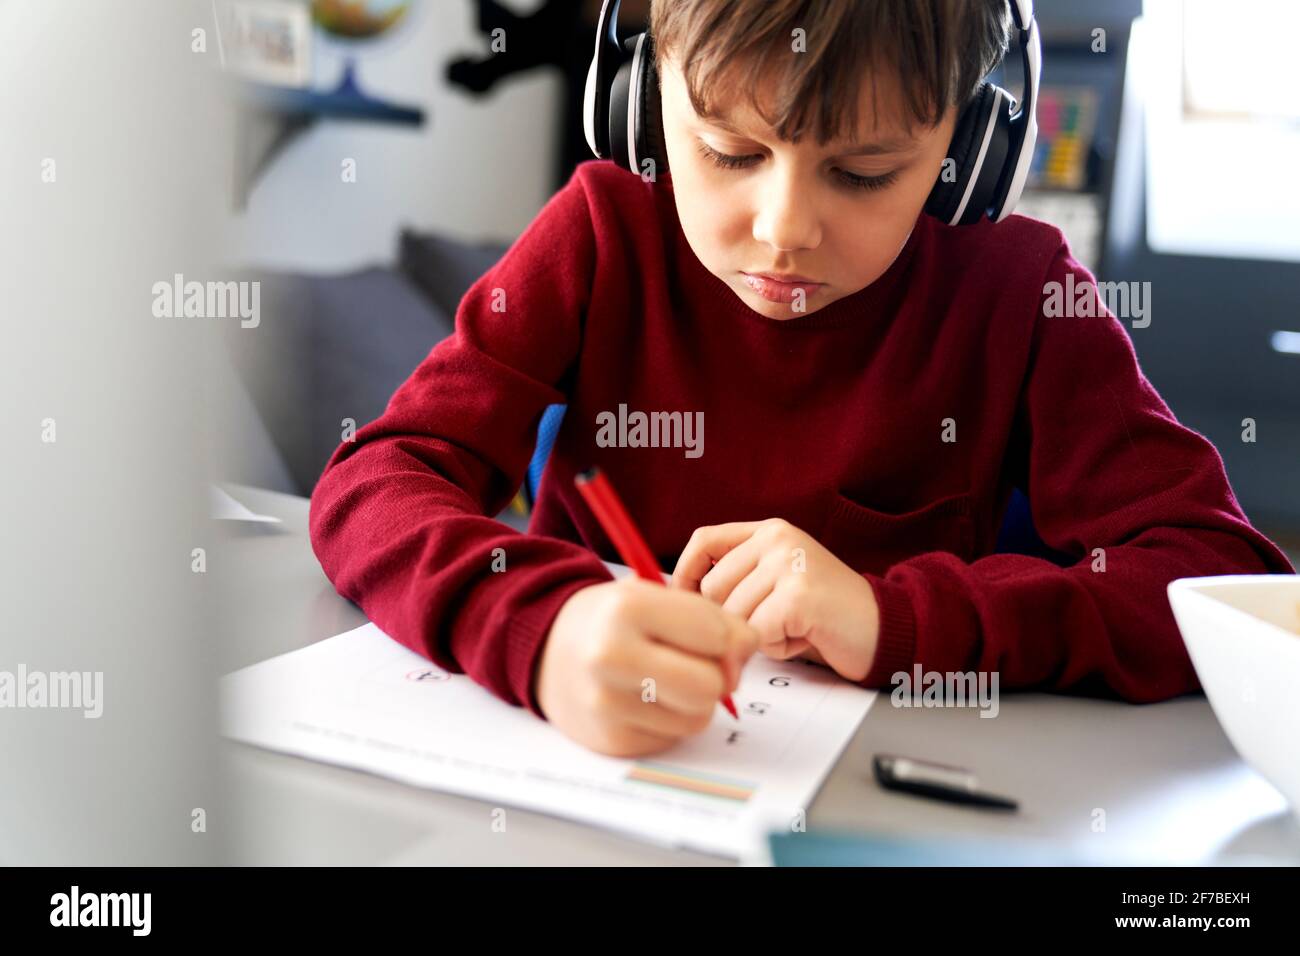 Close up of boy doing homework during a lockdown Stock Photo